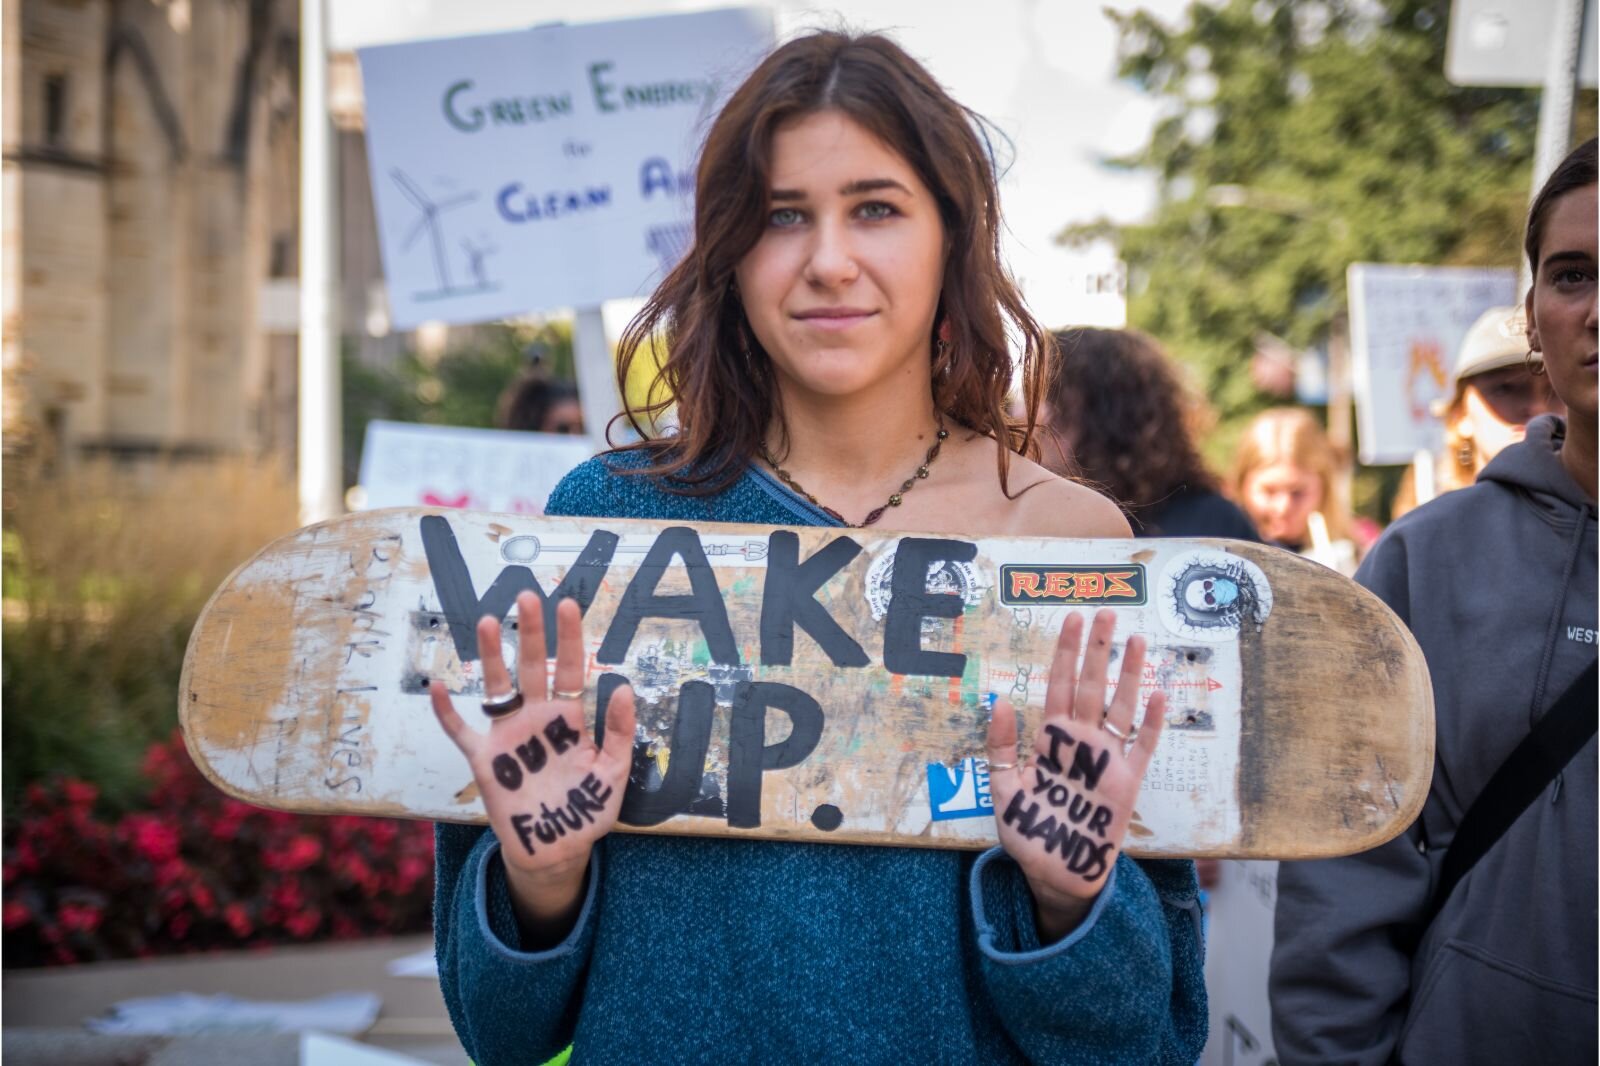 Students are asking adults to "Wake Up" and end fossil fuel use as part of the Youth Climate Strike.